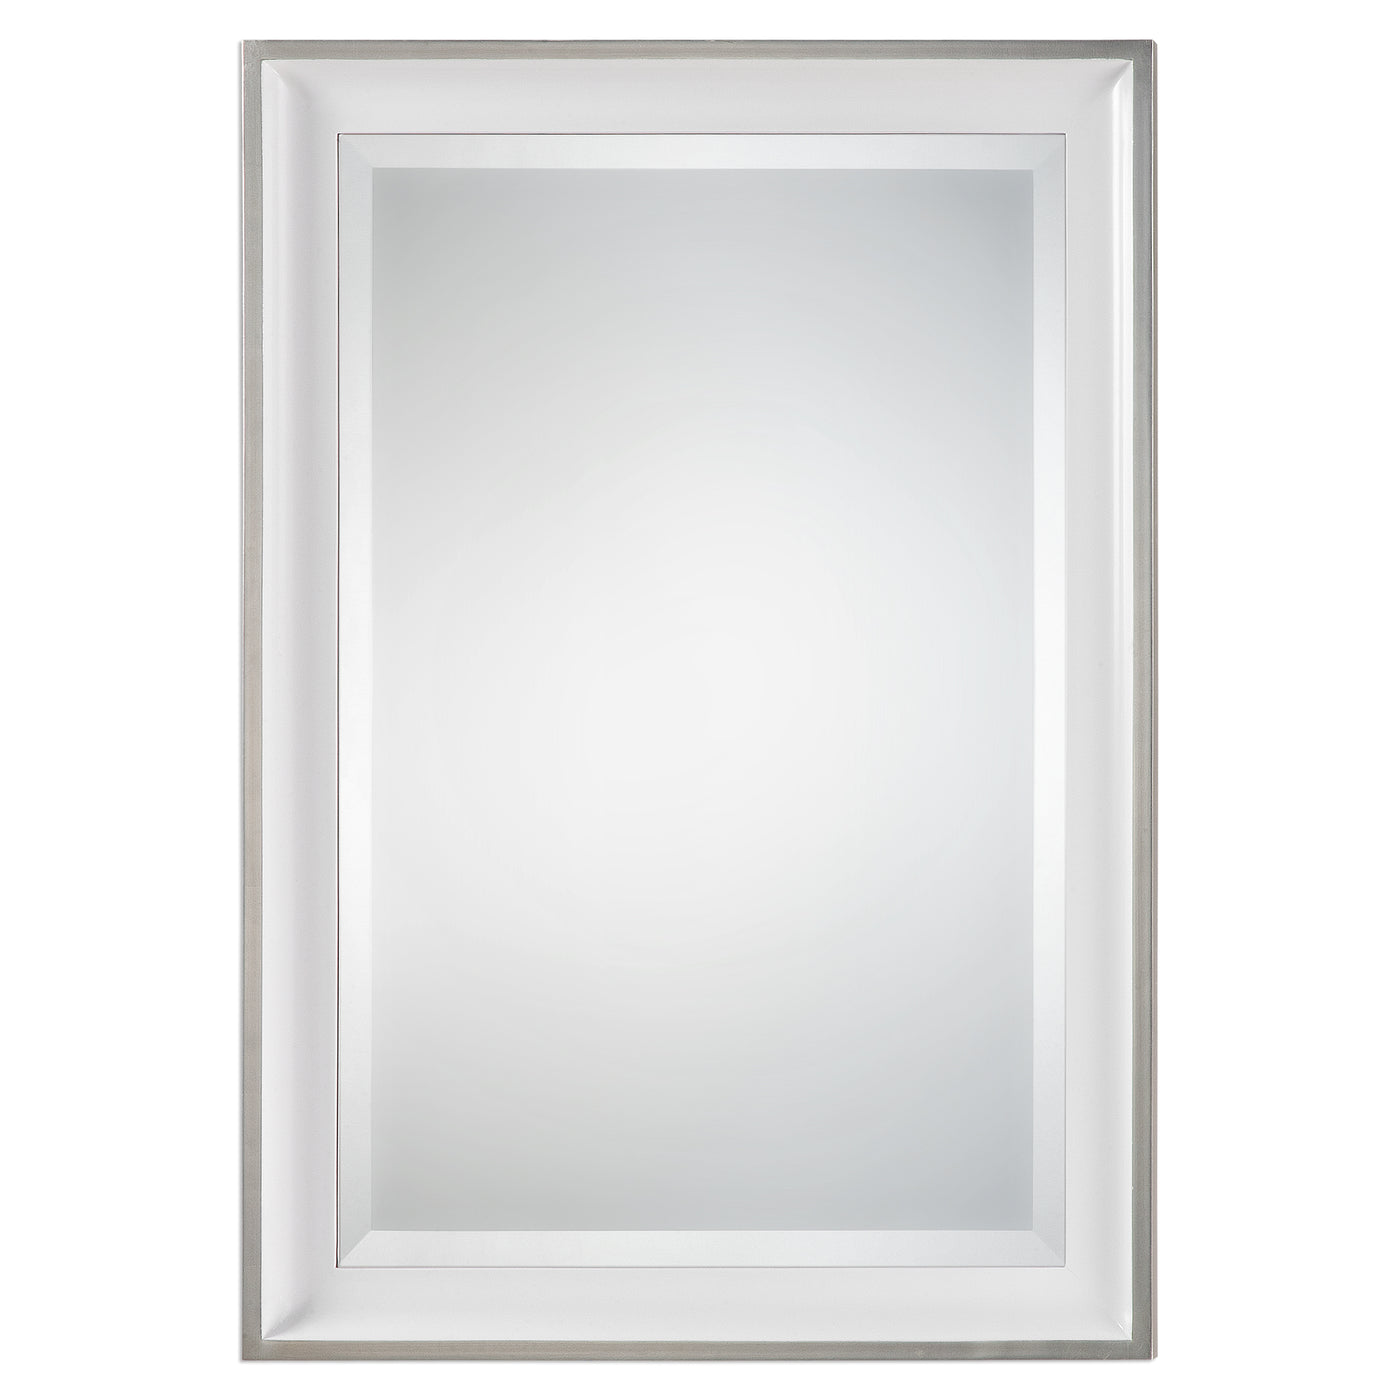 Sloped Profile Frame Finished In Gloss White, Accented With A Silver Leaf Outer Edge. Mirror Is Beveled And May Be Hung Ho...